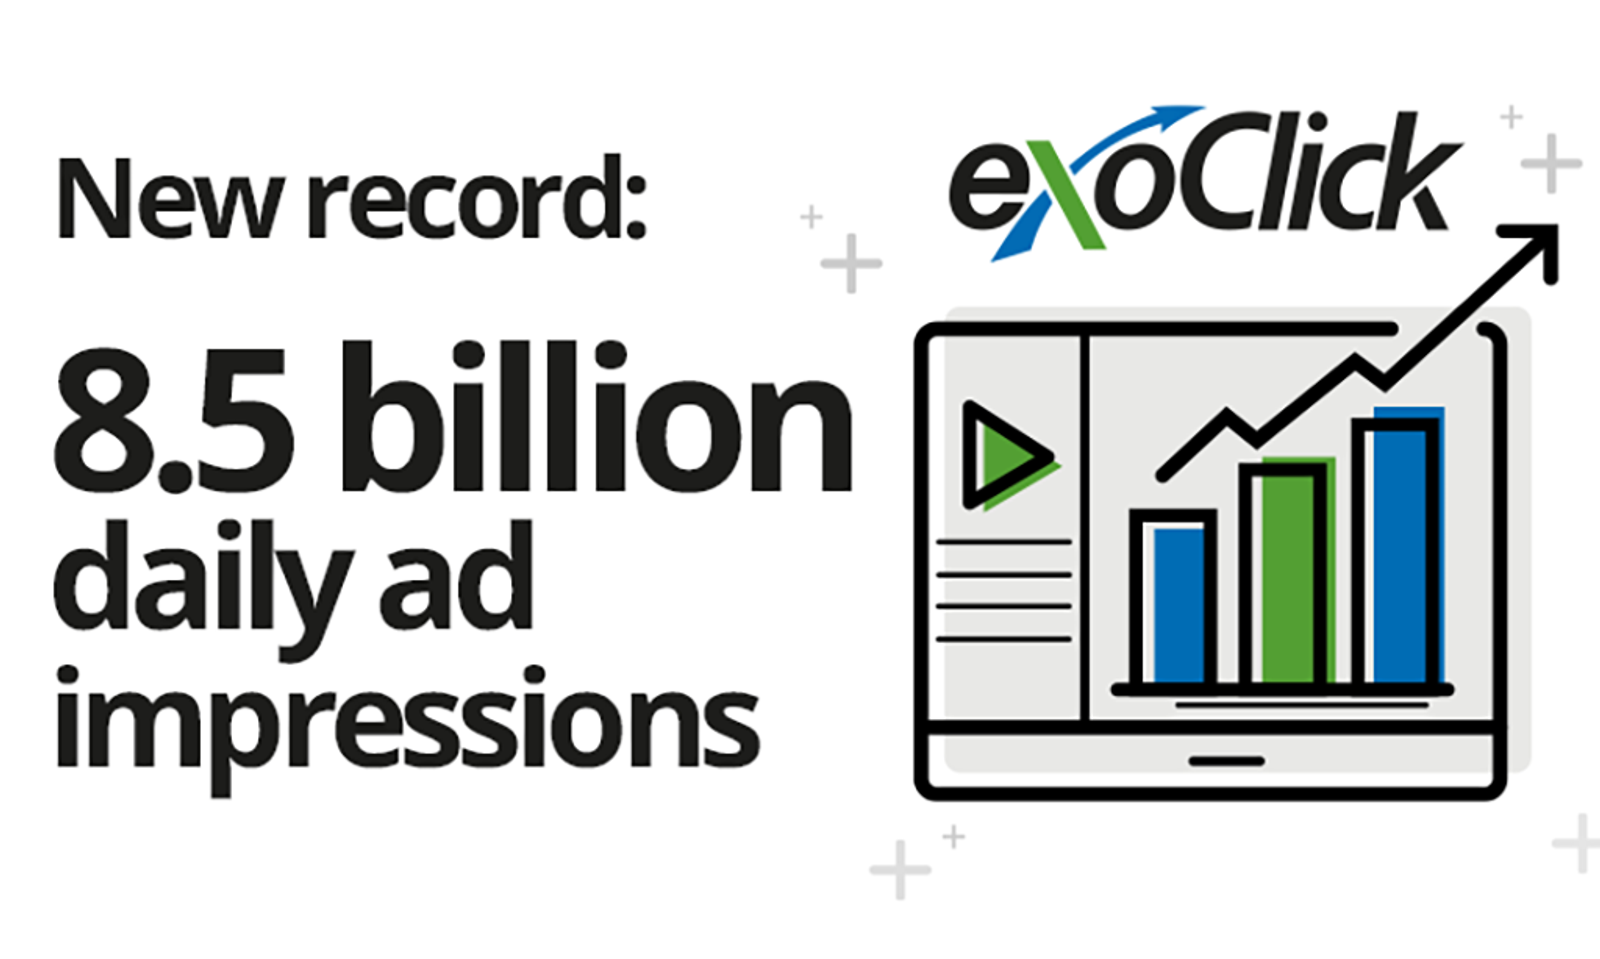 ExoClick Now Serving More Than 8.5 Billion Ad Impressions Daily